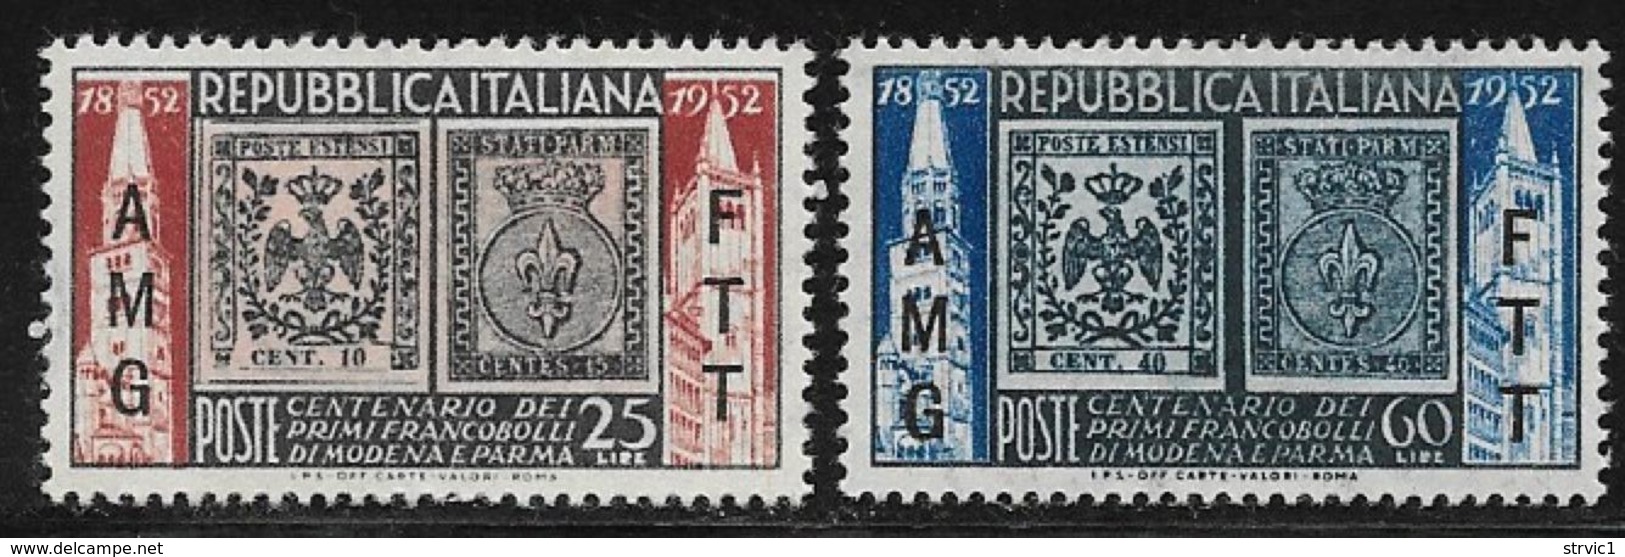 Trieste Zone A, Scott # 146-7 MNH Italy #602-3 Overprinted, 1952 - Mint/hinged